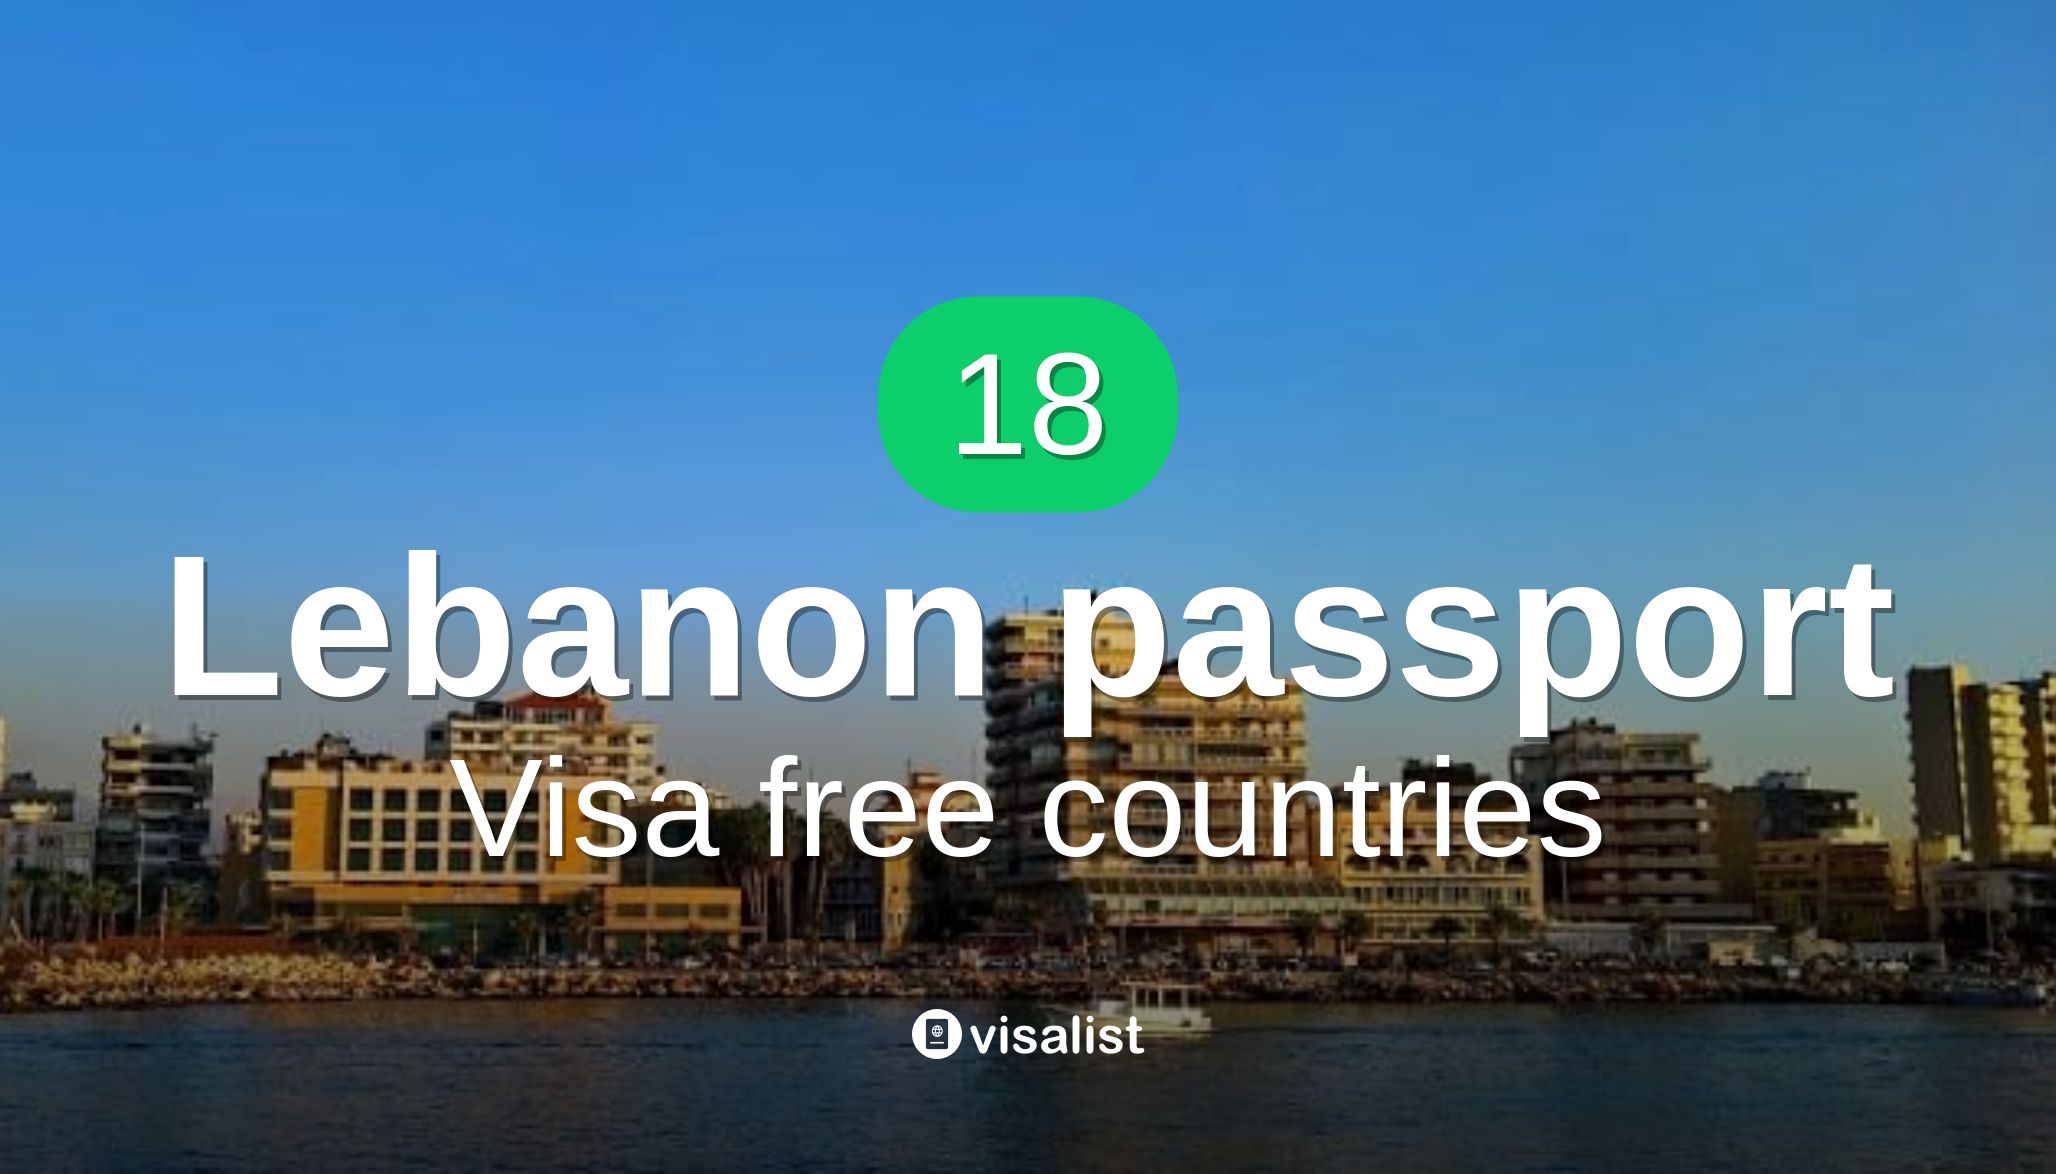 where can lebanese travel without a visa